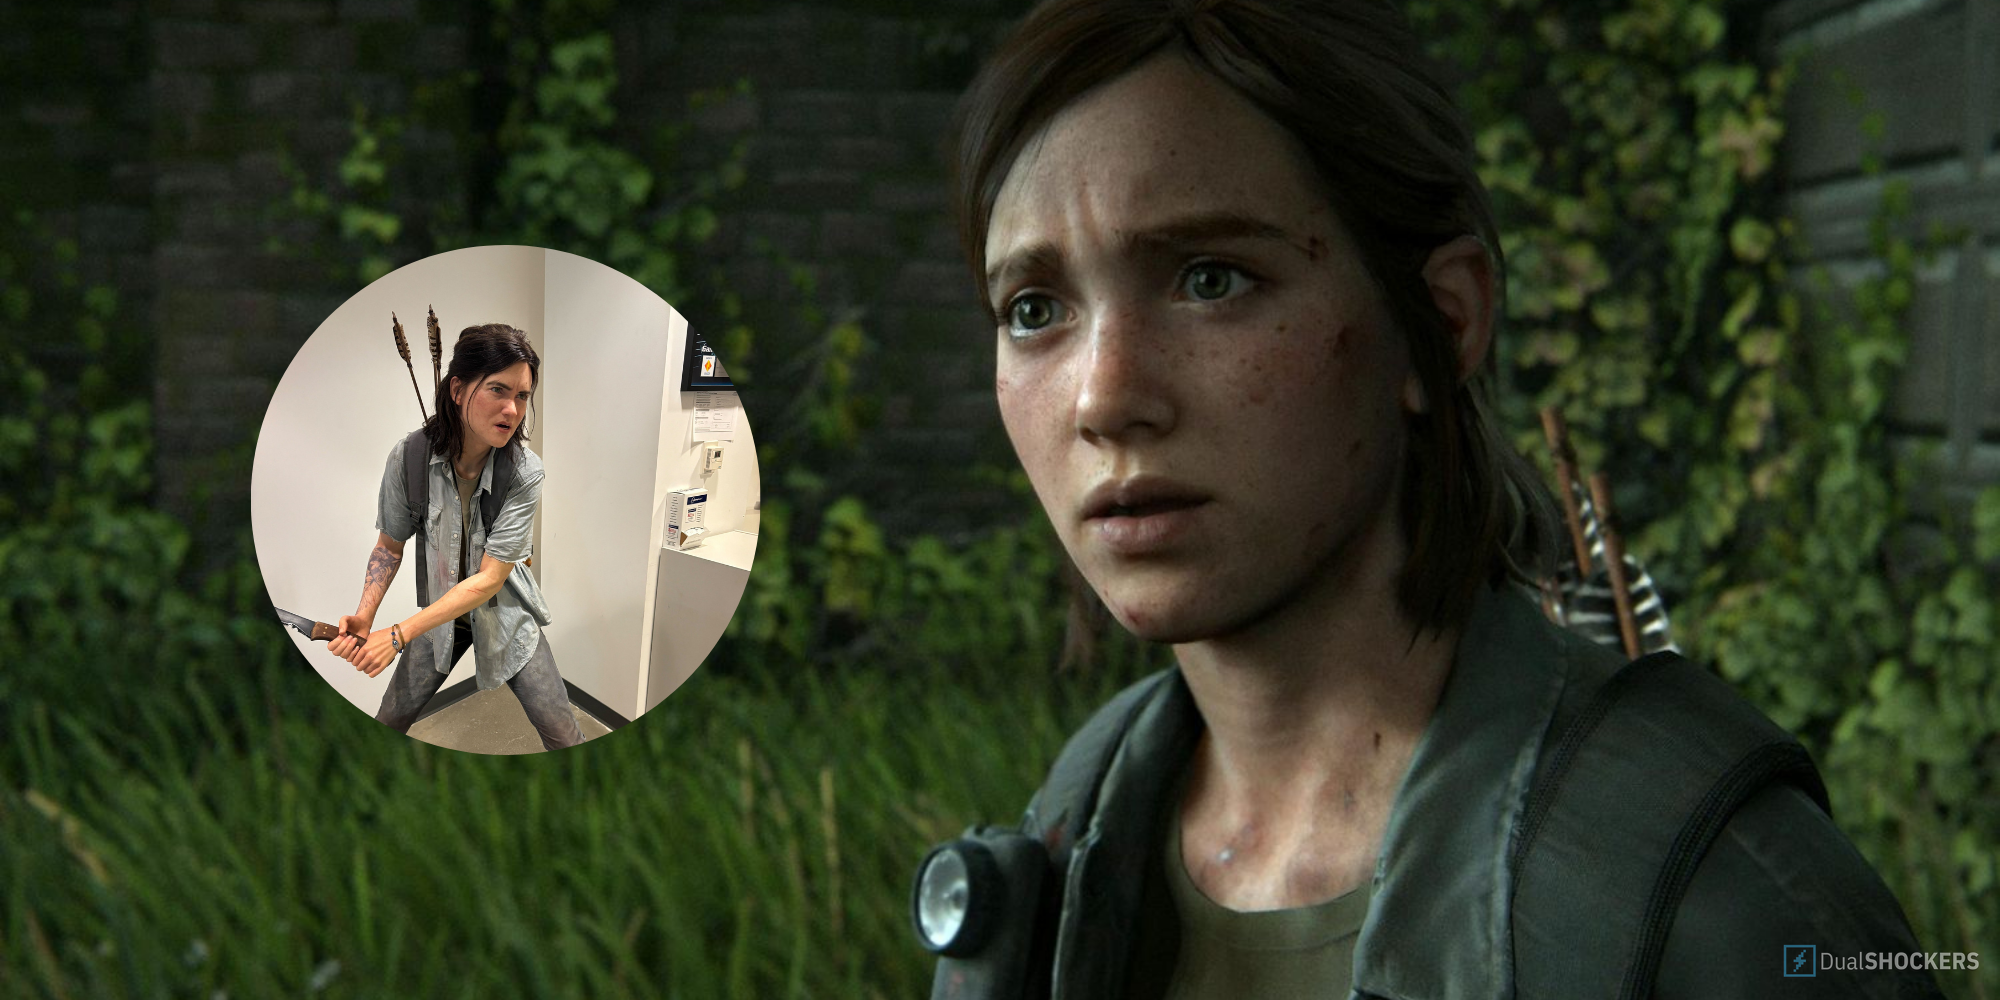 The Last Of Us Fans Baffled By Realistic Ellie Statue At Naughty Dog HQ